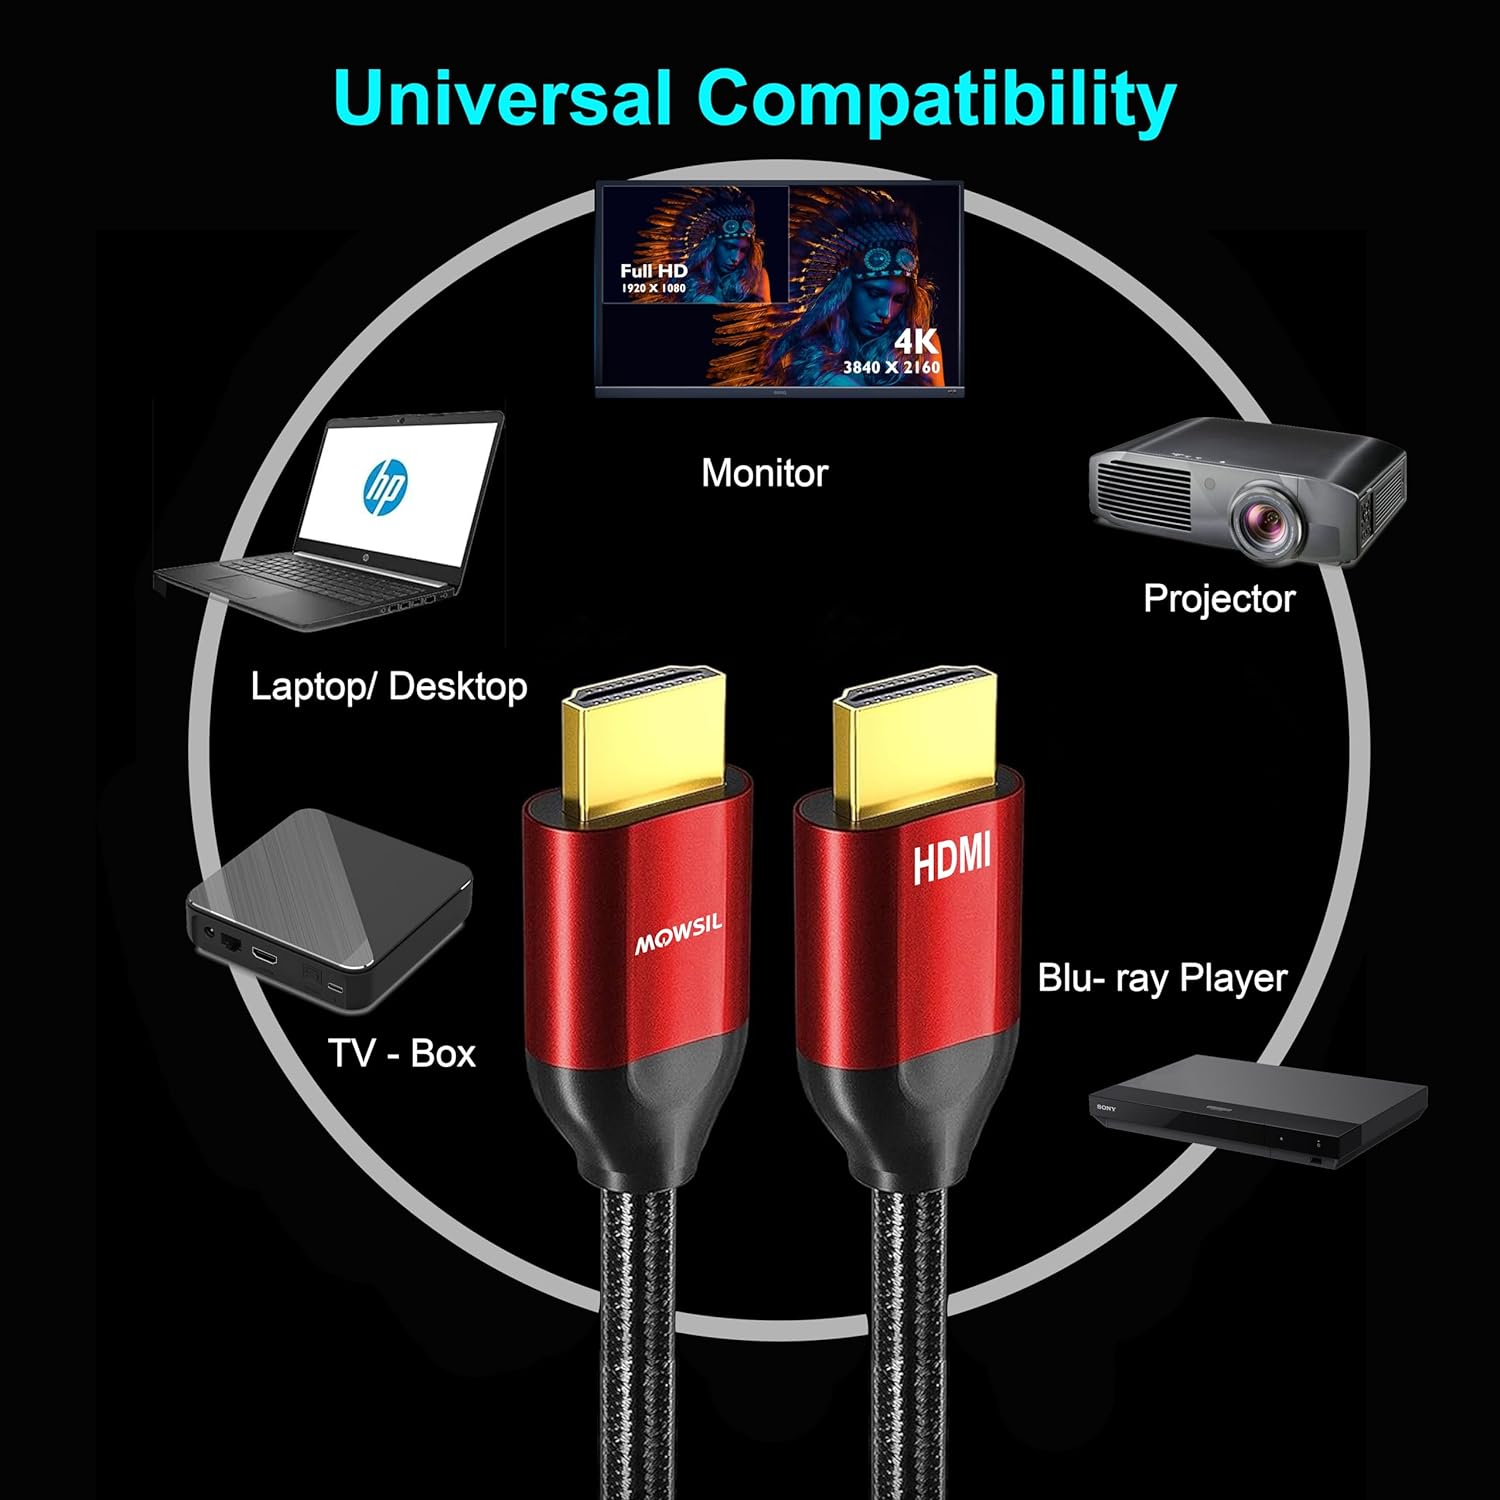 Mowsil_4K_HDMI_Cable_1.4_15_Mtr,_4K@30Hz_HDMI_1.4_High-Speed_HDMI_to_HDMI_Video_Ultra_HD_3D_4K_HDMI_Braided_Compatible_with_MacBook_Pro_TV_Switch_Xbox_PS5_PC_Laptop-5.jpg